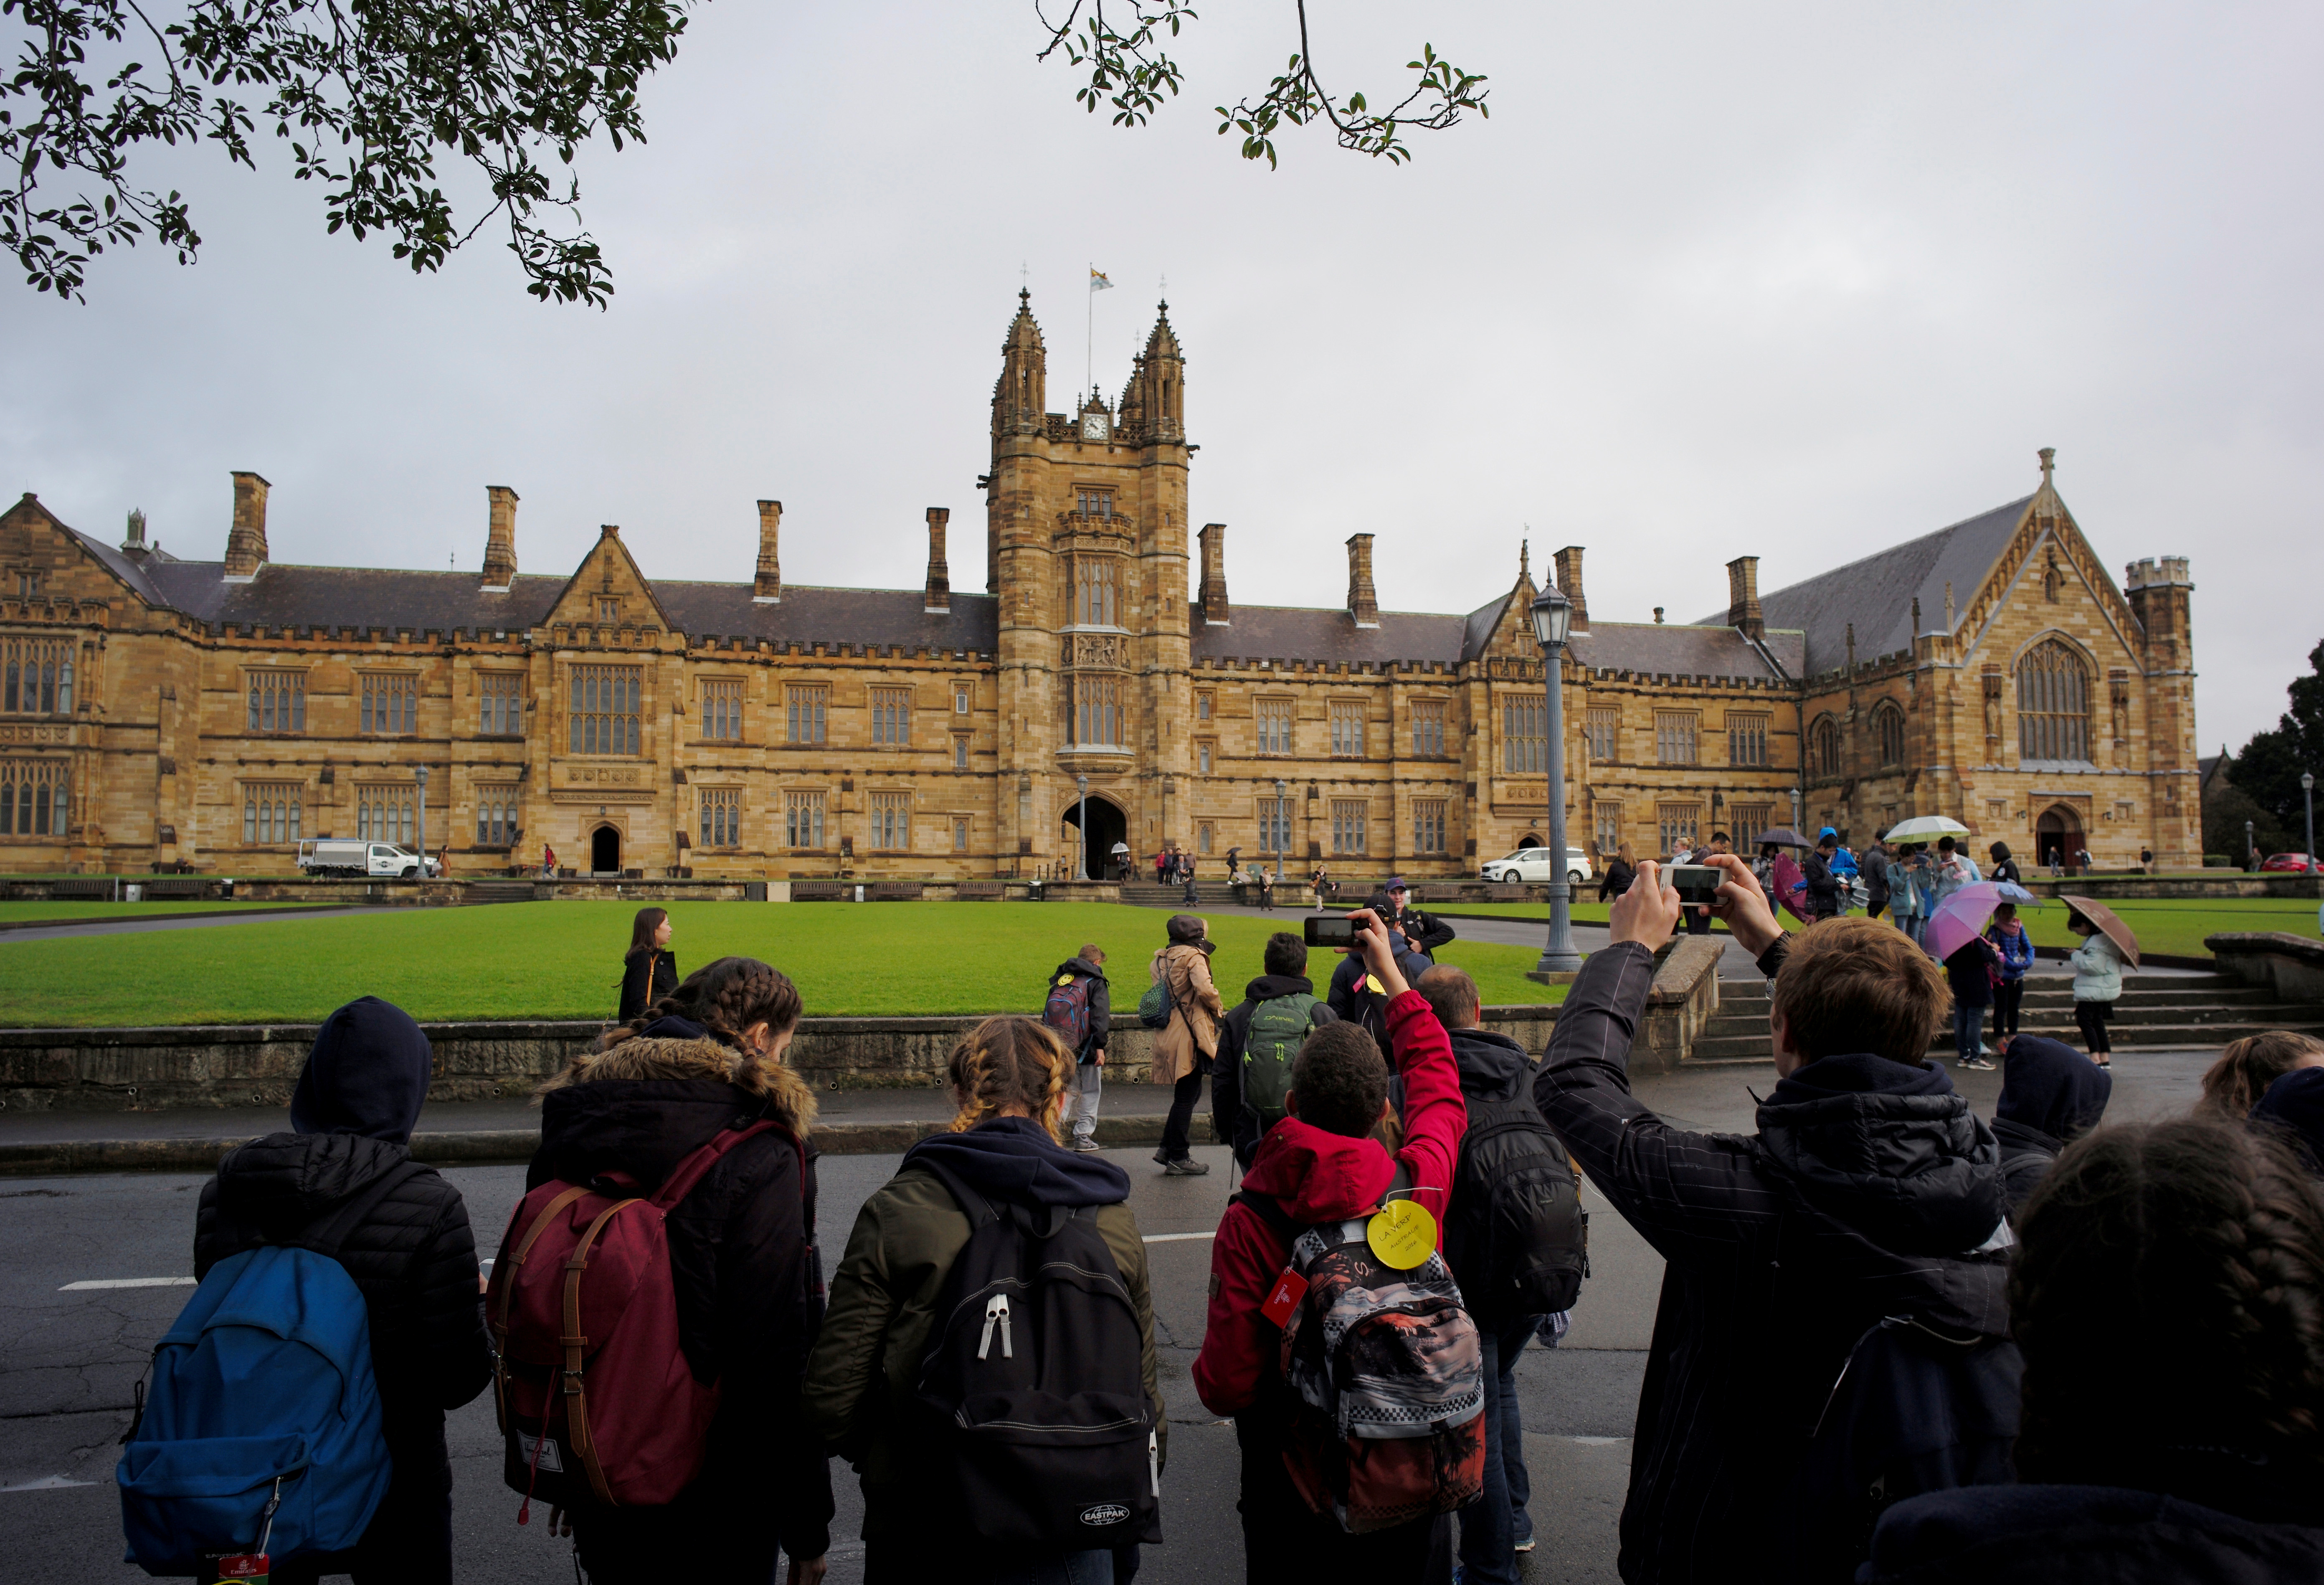 Visitors take pictures of the main building at the University of Sydney in Australia